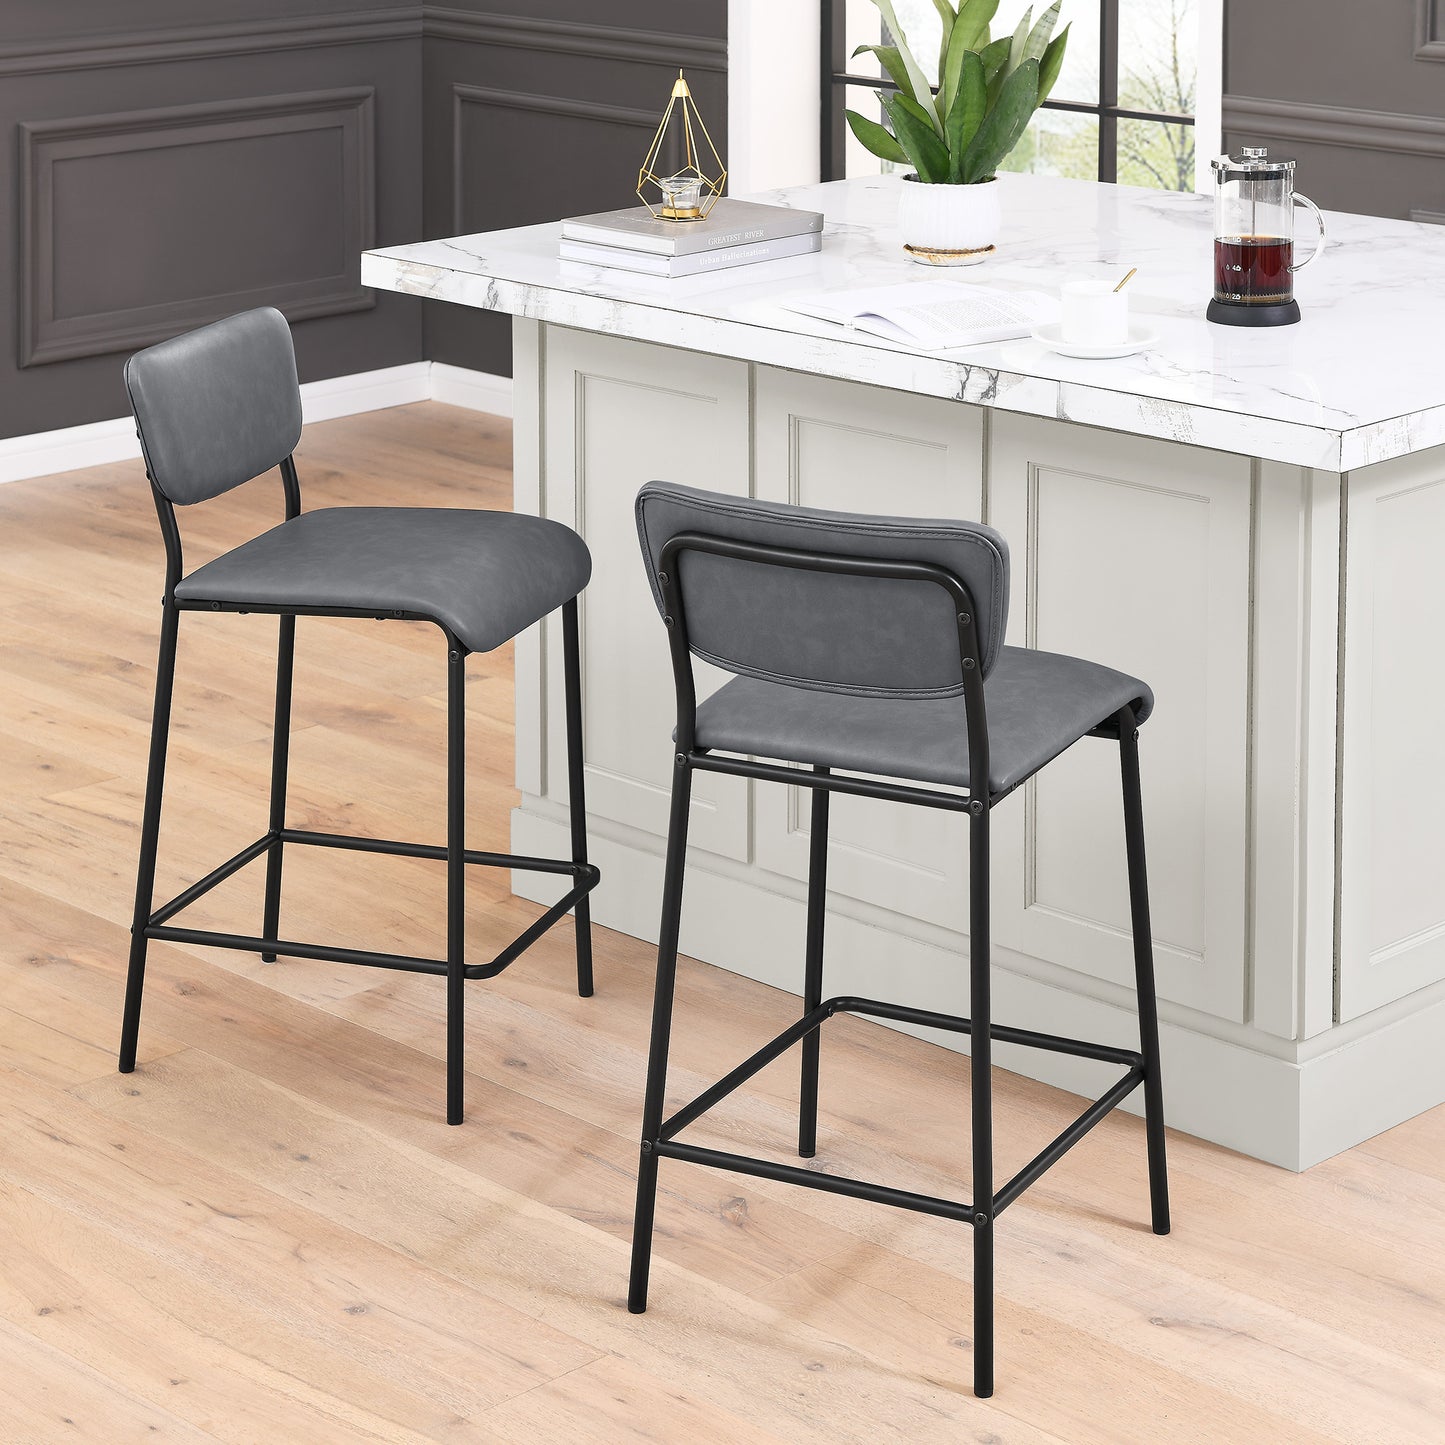 Pu Faux Leather Counter Stools Set of 2, Pub Counter Stool with Back and Footrest, Grey\n(17.5"x19.25“x34.5”）